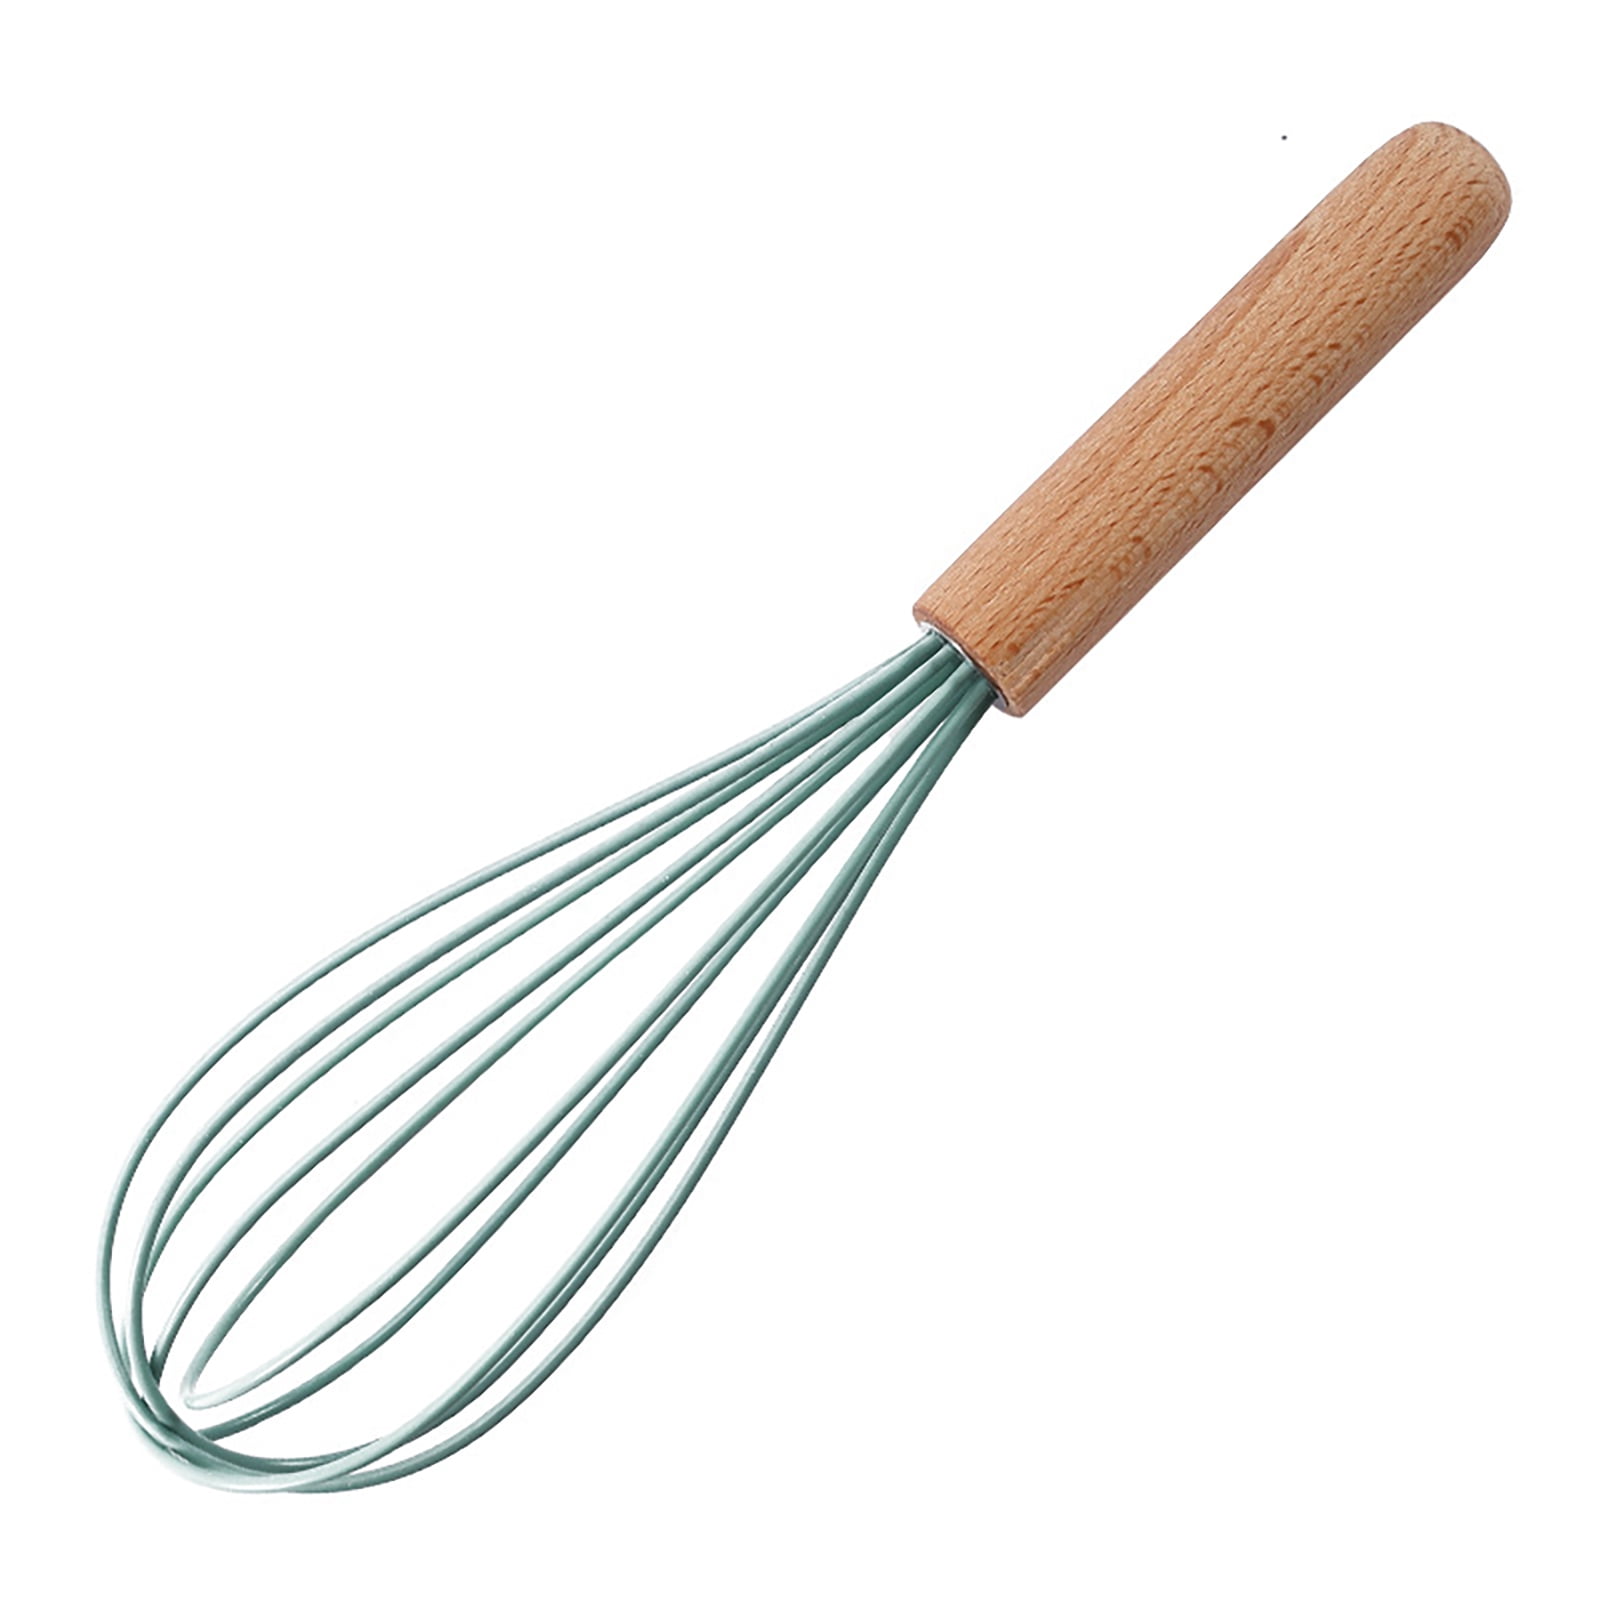 Hariumiu Kitchen 10 Inch Wooden Handle Silicone Whisk Reusable Labor-saving  Egg Beater for Whisking, Beating, Blending Ingredients, Mixing Sauces